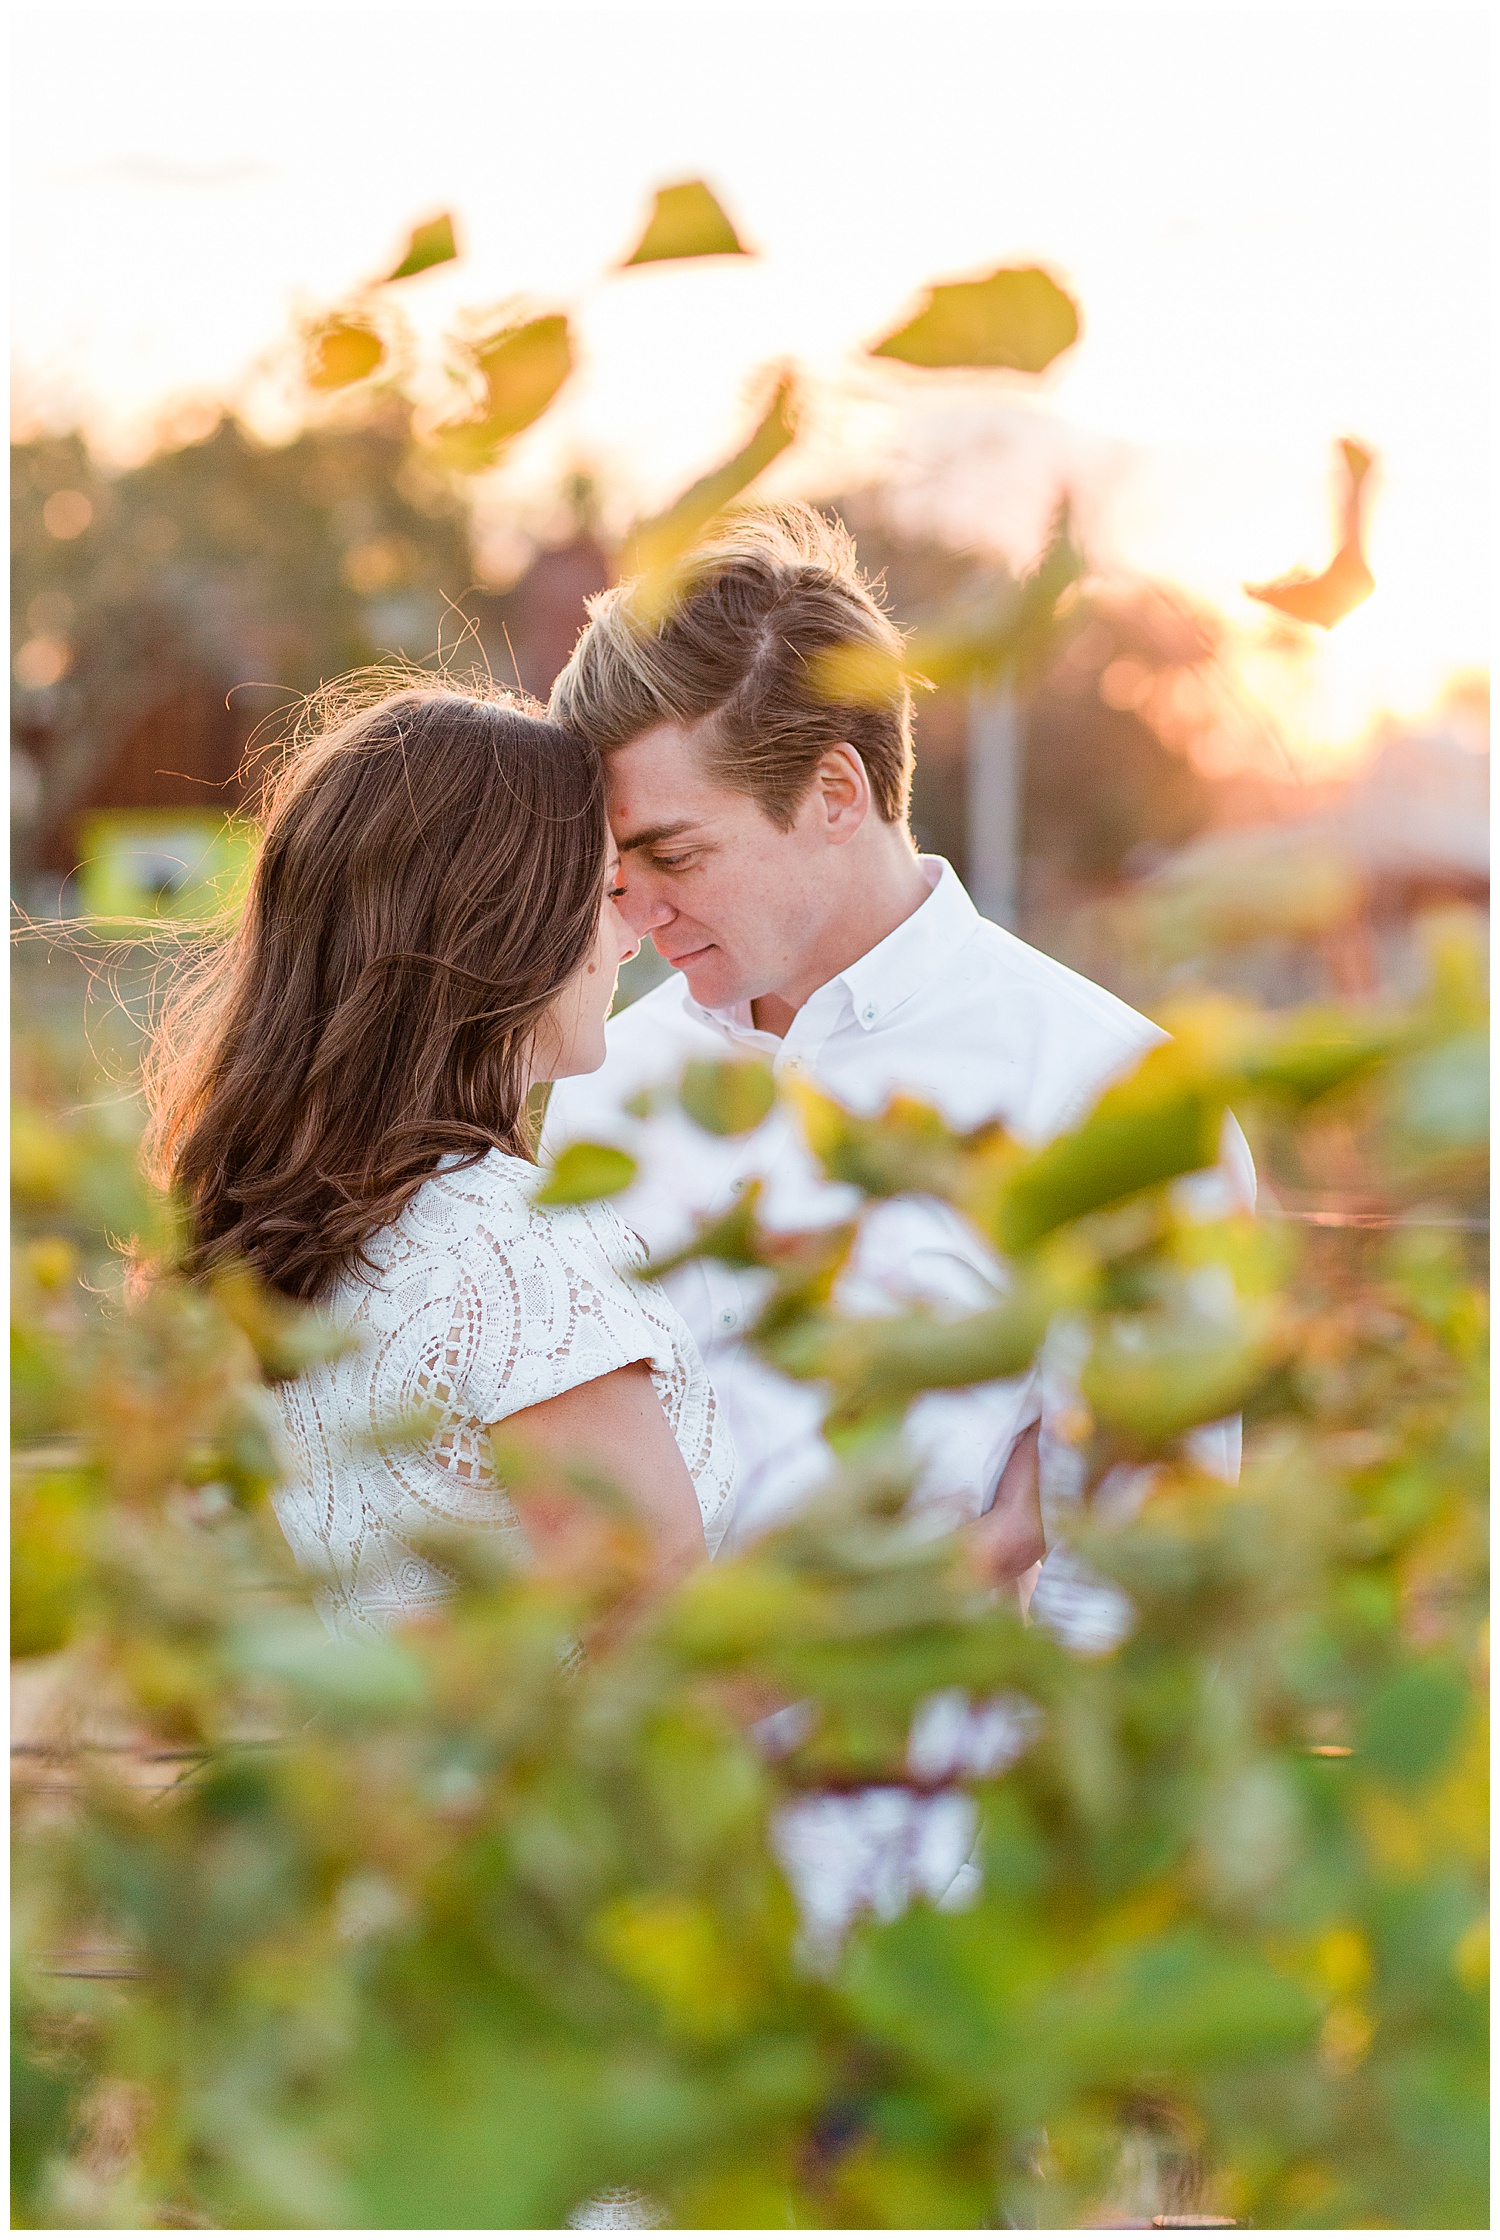 Couple are forehead to forehead through the vines at a winery